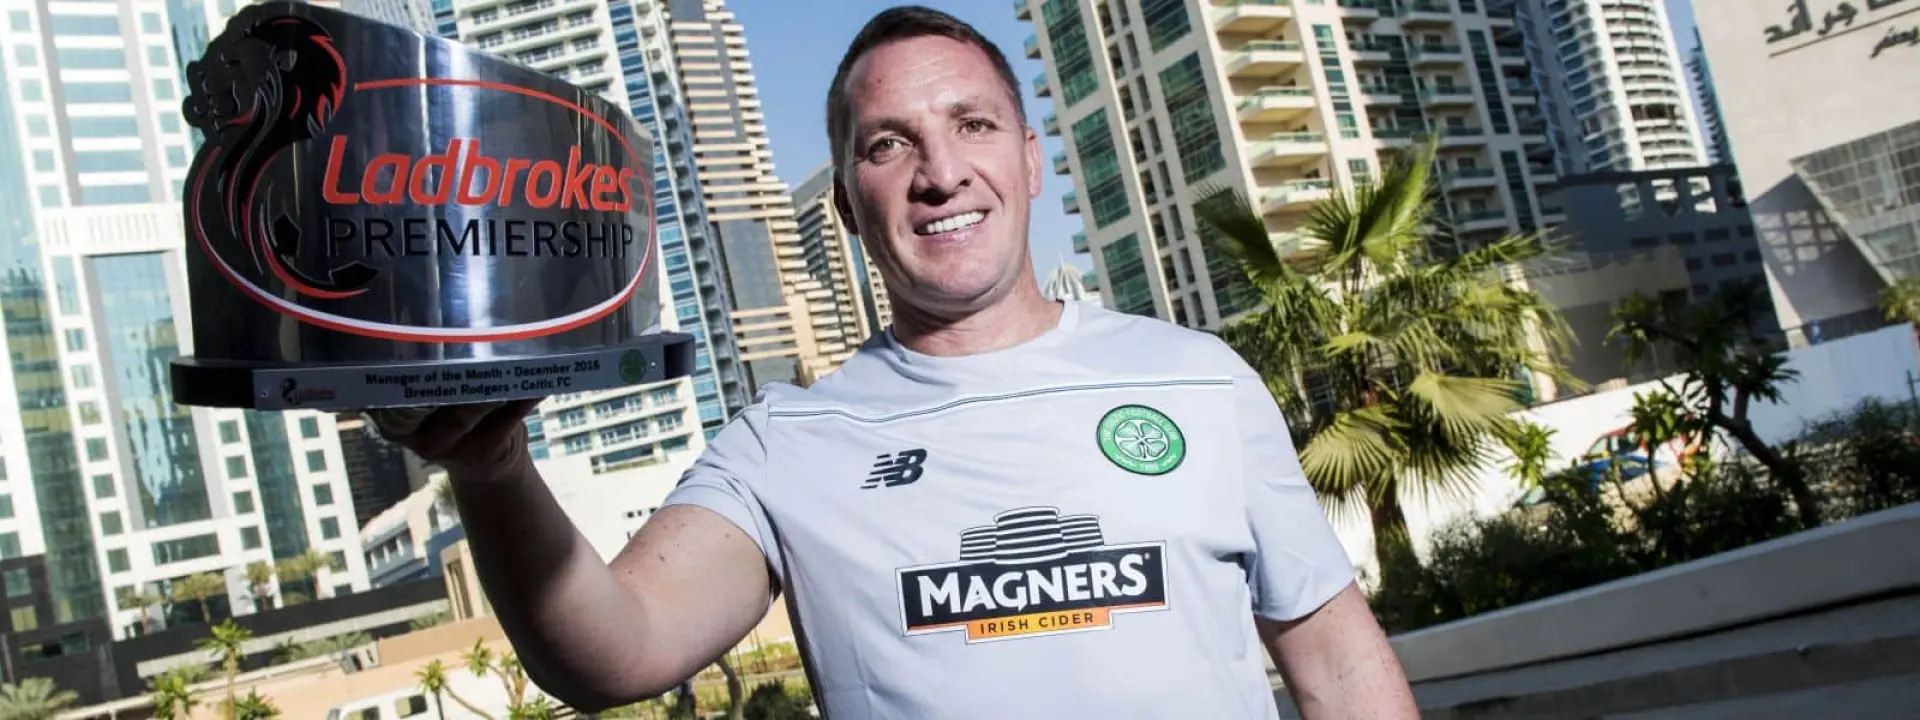 Brendan Rodgers - Ladbrokes Premiership Manager of the Month December 2016